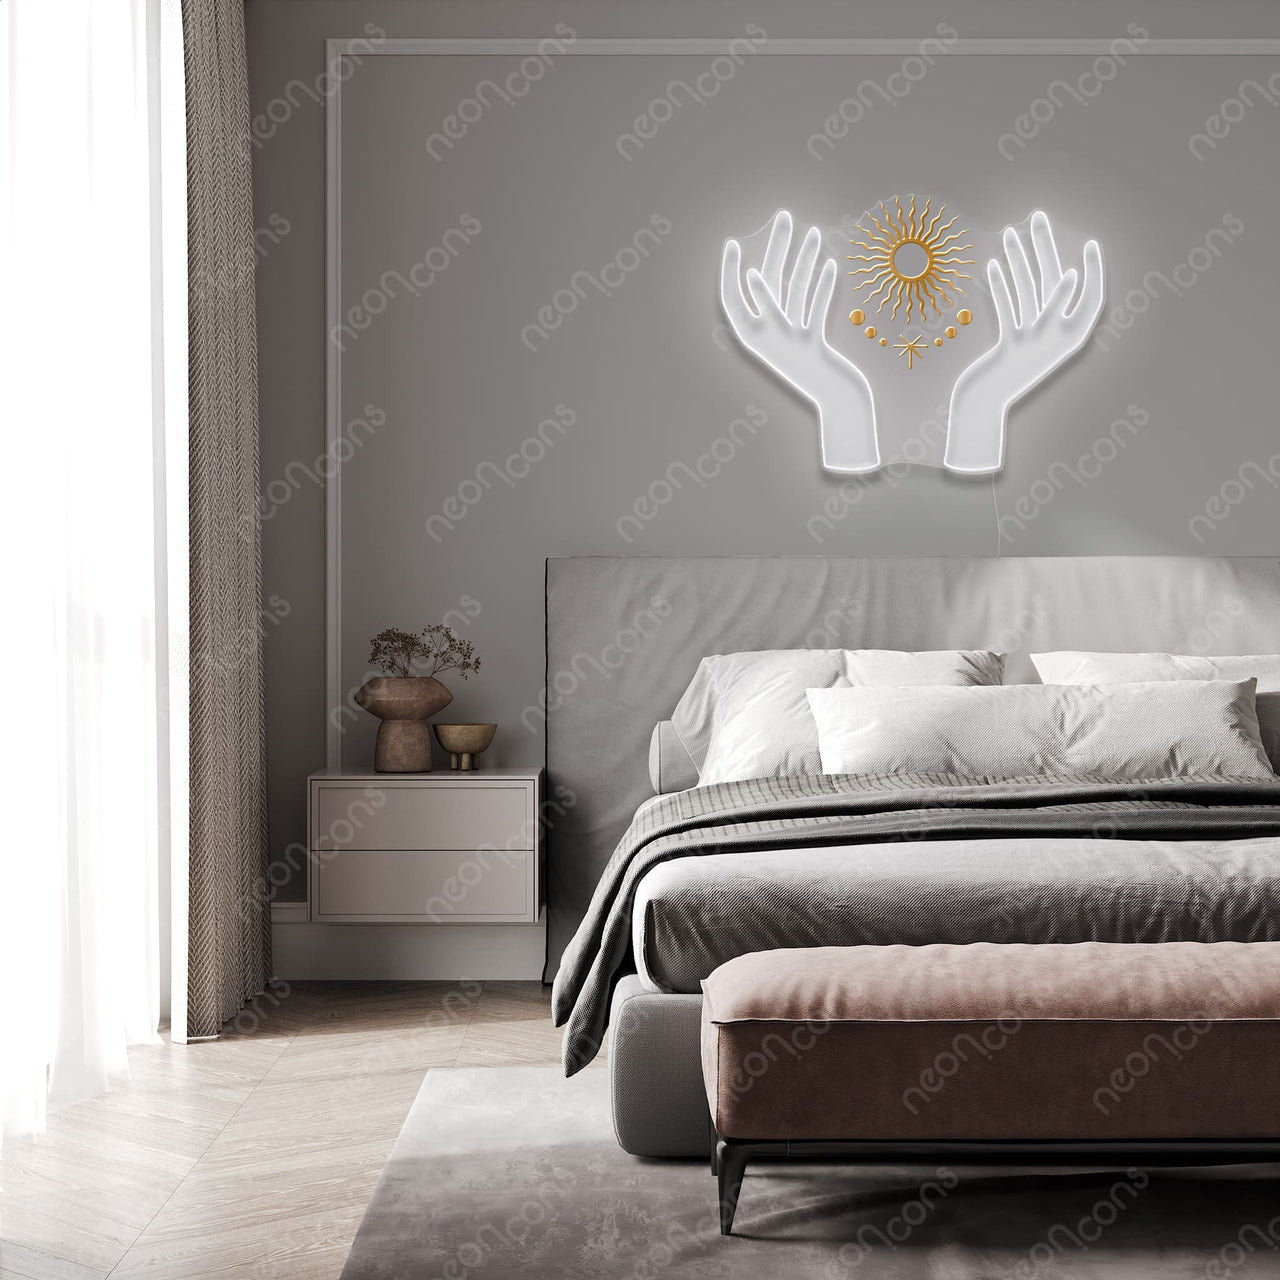 "Radiant Hands" LED Neon x Print x Reflective Acrylic by Neon Icons